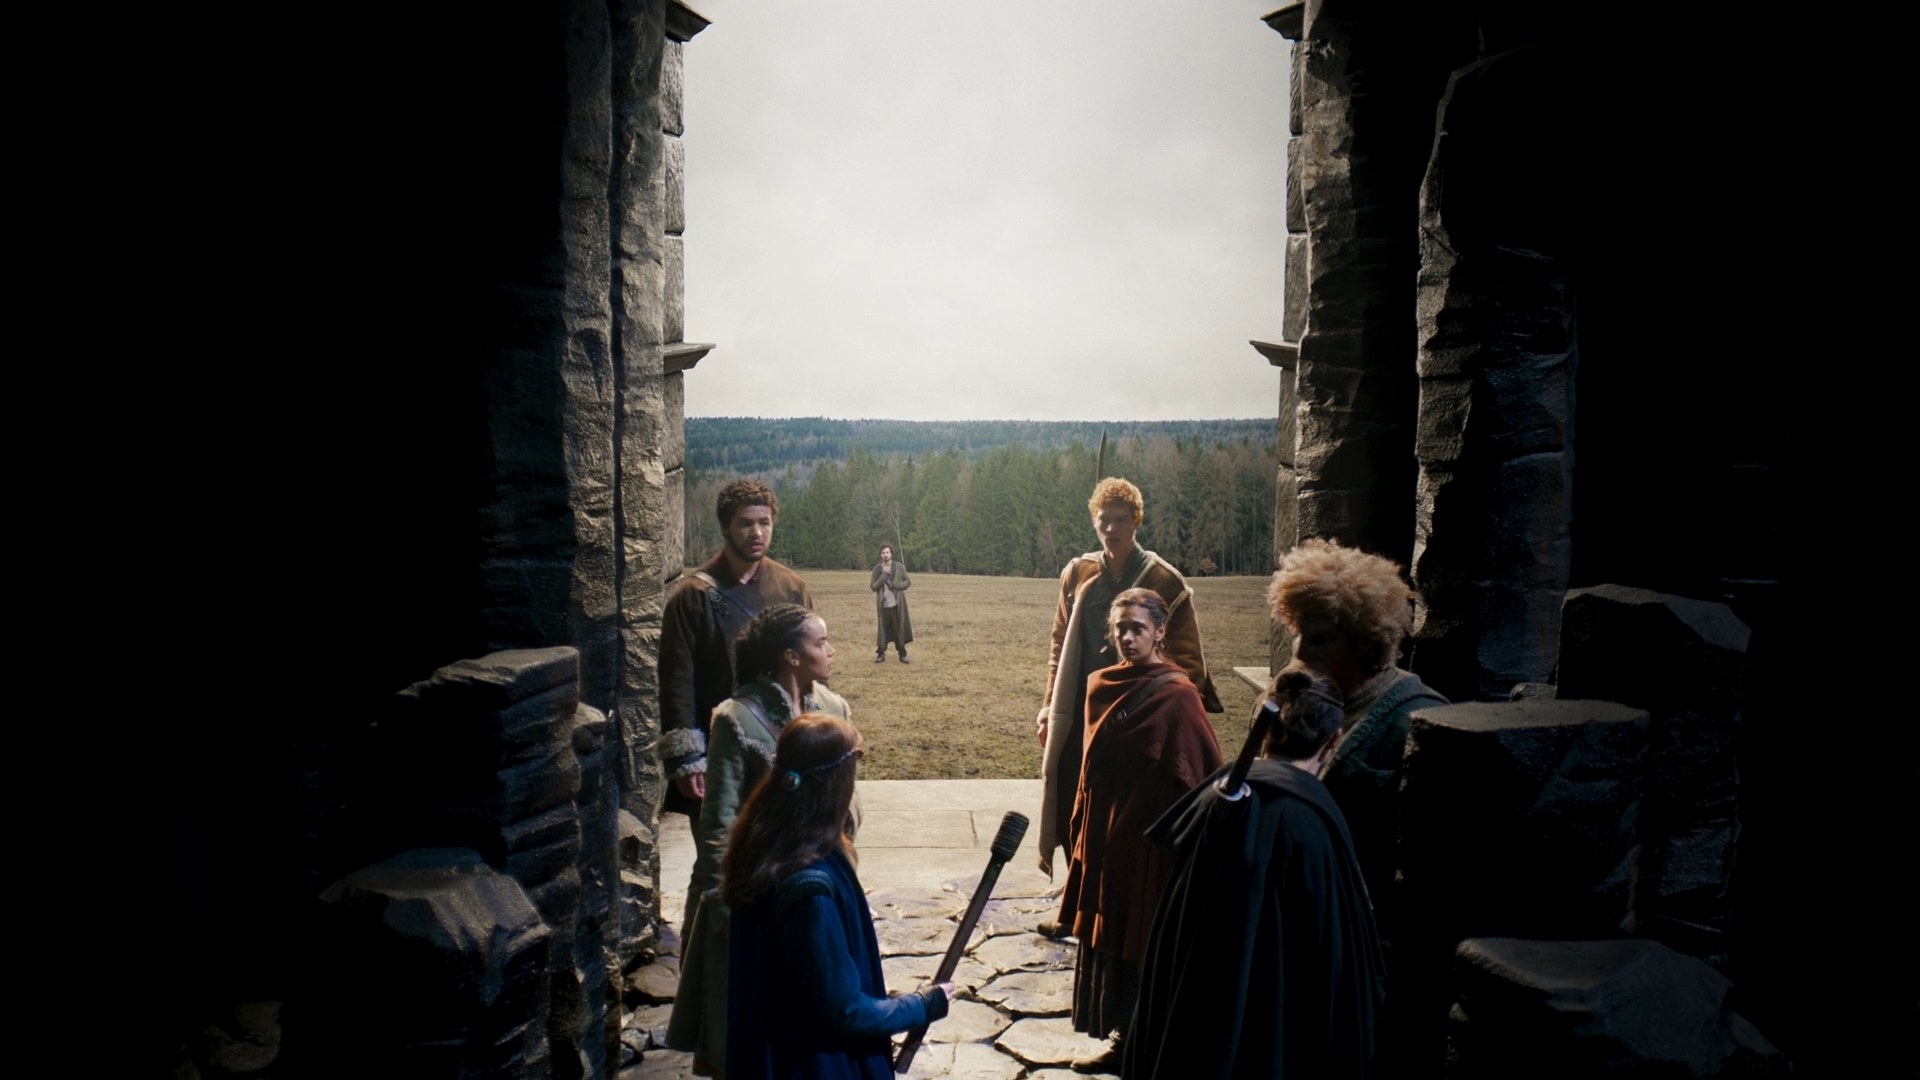 A shot from inside the Waygate, showing all of the main characters have entered, except for Mat, who stands alone on the hilltop outside the Waygate